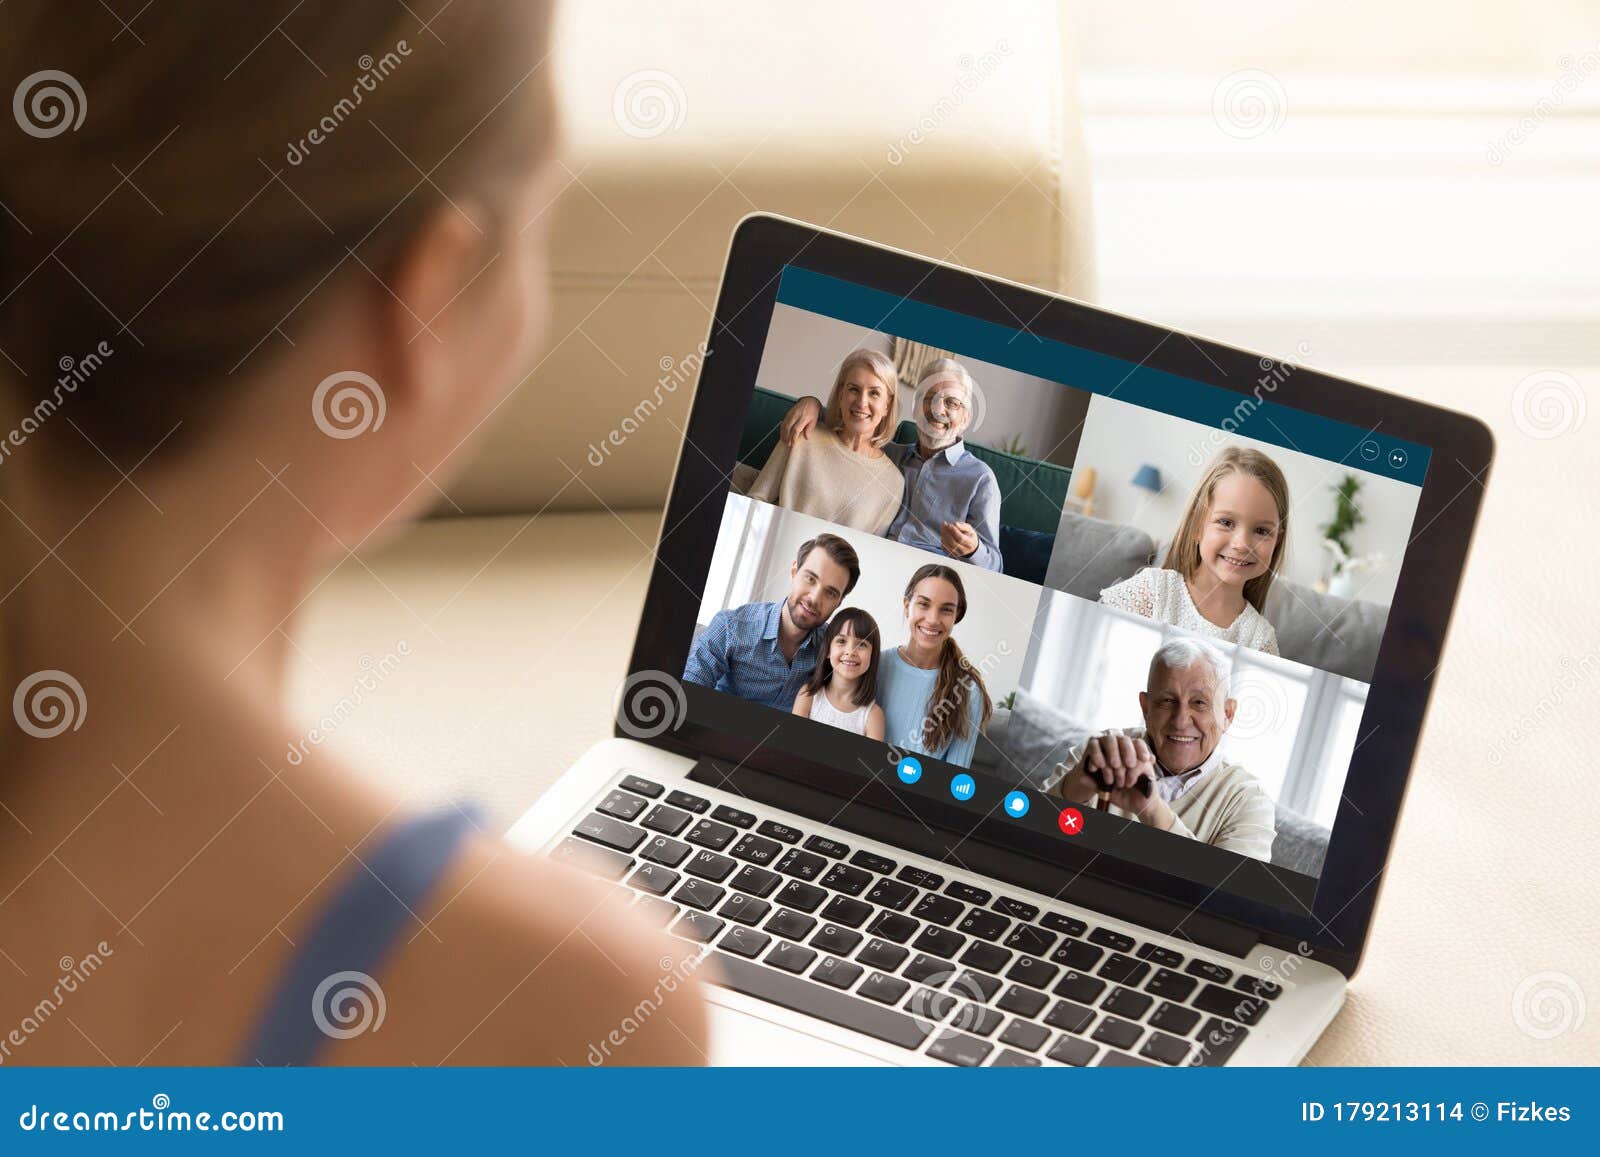 woman communicating with family using laptop and videoconference application